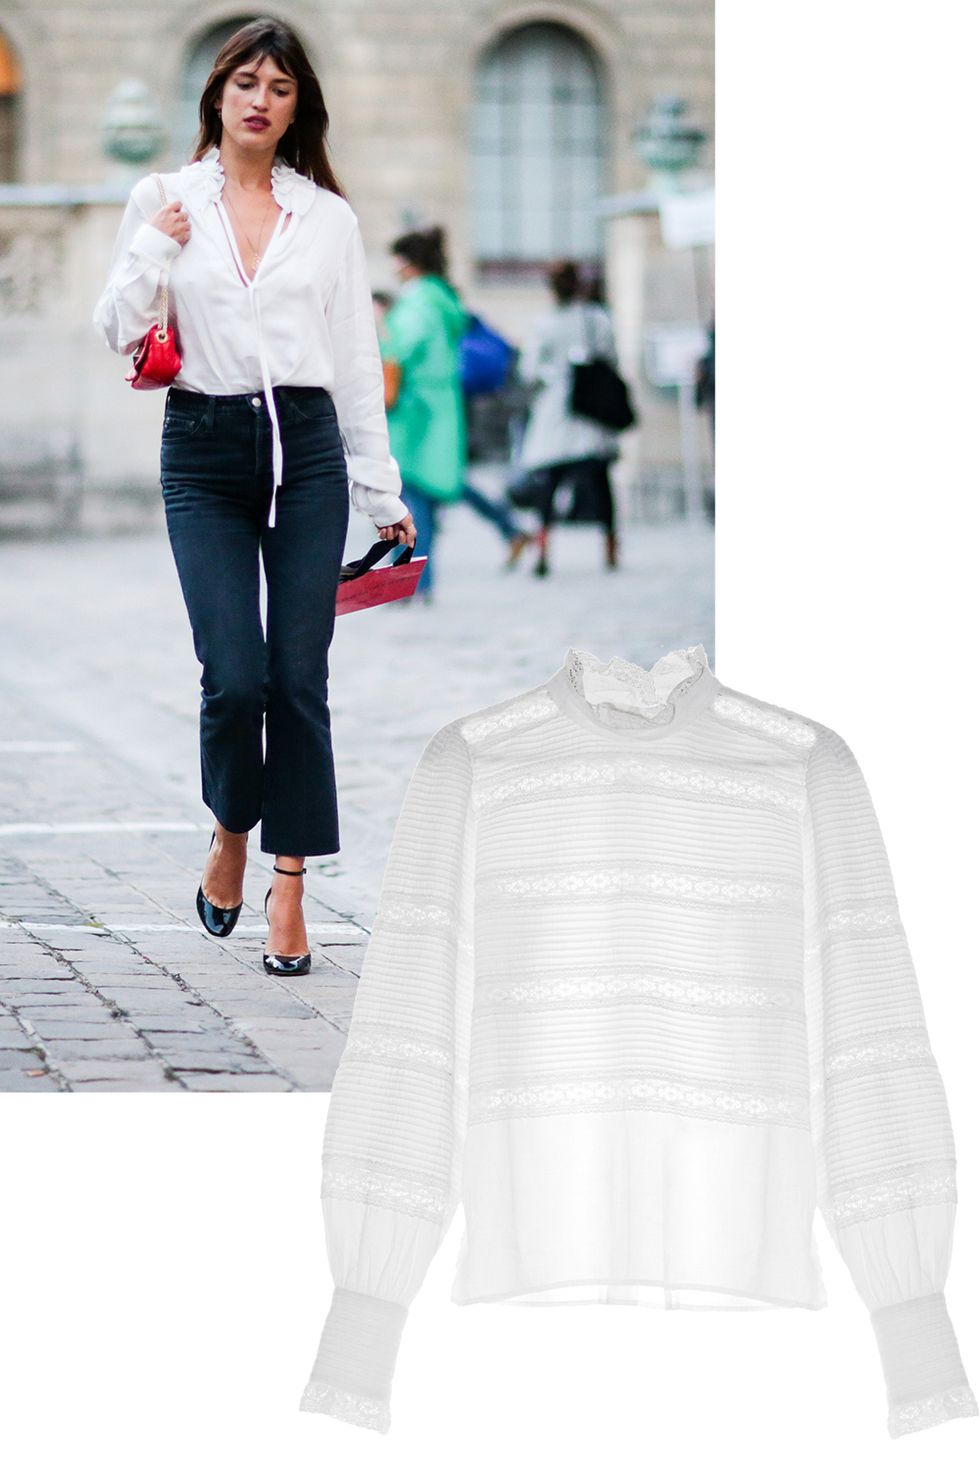 <p>Who: Jeanna Damas</p><p>What: A pretty blouse and cropped trousers gives that ideal French girl chic.</p><p><em data-redactor-tag="em" data-verified="redactor">Isabel Marant 'Etoile' blouse, $405</em><span class="redactor-invisible-space" data-verified="redactor" data-redactor-tag="span" data-redactor-class="redactor-invisible-space"><em data-redactor-tag="em" data-verified="redactor">, <a href="http://www.matchesfashion.com/us/products/Isabel-Marant-%C3%89toile-Ria-high-neck-lace-insert-blouse-1059571" target="_blank">matchesfashion.com</a>.&nbsp;</em></span></p>